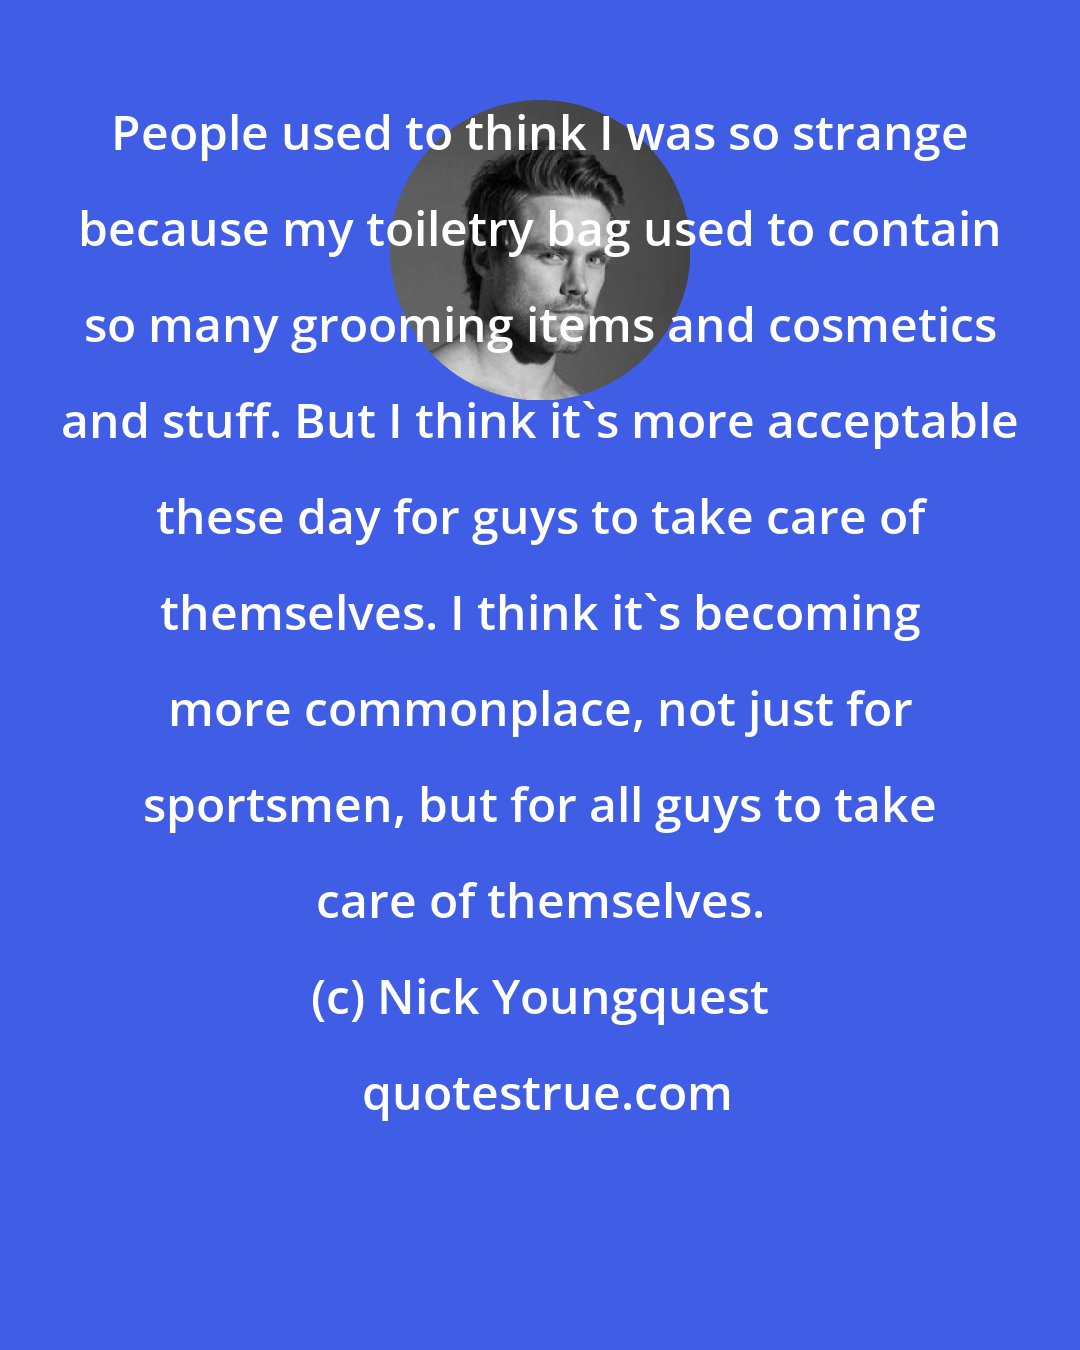 Nick Youngquest: People used to think I was so strange because my toiletry bag used to contain so many grooming items and cosmetics and stuff. But I think it's more acceptable these day for guys to take care of themselves. I think it's becoming more commonplace, not just for sportsmen, but for all guys to take care of themselves.